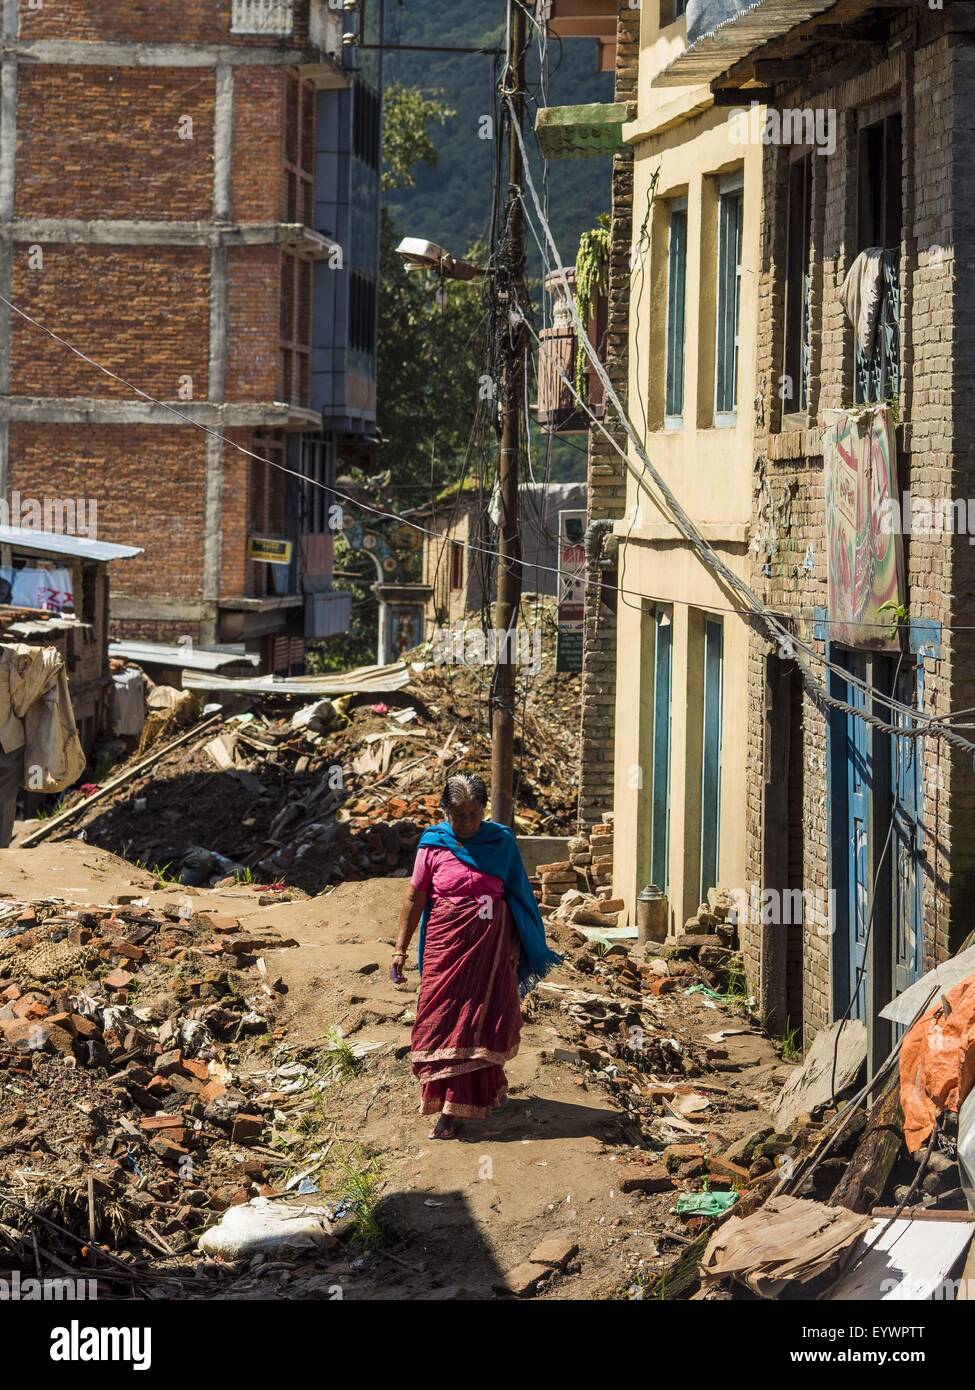 Sankhu, Central Region, Nepal. 3rd Aug, 2015. A woman walks down a street still strewn with debris from the earthquake in Sankhu, a community about 90 minutes from central Kathmandu. The Nepal Earthquake on April 25, 2015, (also known as the Gorkha earthquake) killed more than 9,000 people and injured more than 23,000. It had a magnitude of 7.8.  It was the worst natural disaster to strike Nepal since the 1934 Nepal''“Bihar earthquake. © ZUMA Press, Inc./Alamy Live News Stock Photo